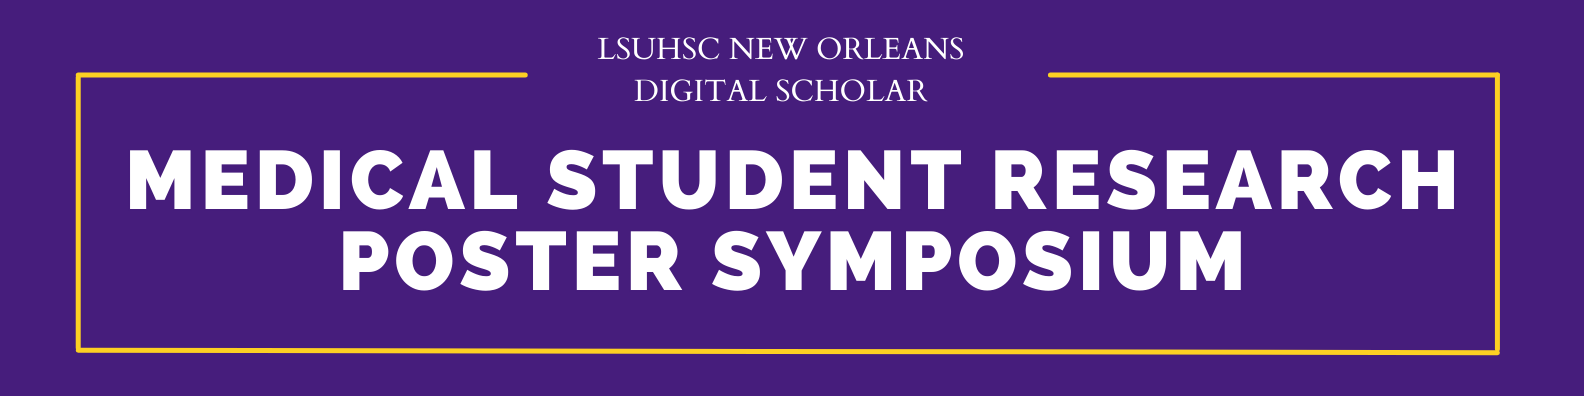 Medical Student Research Poster Symposium